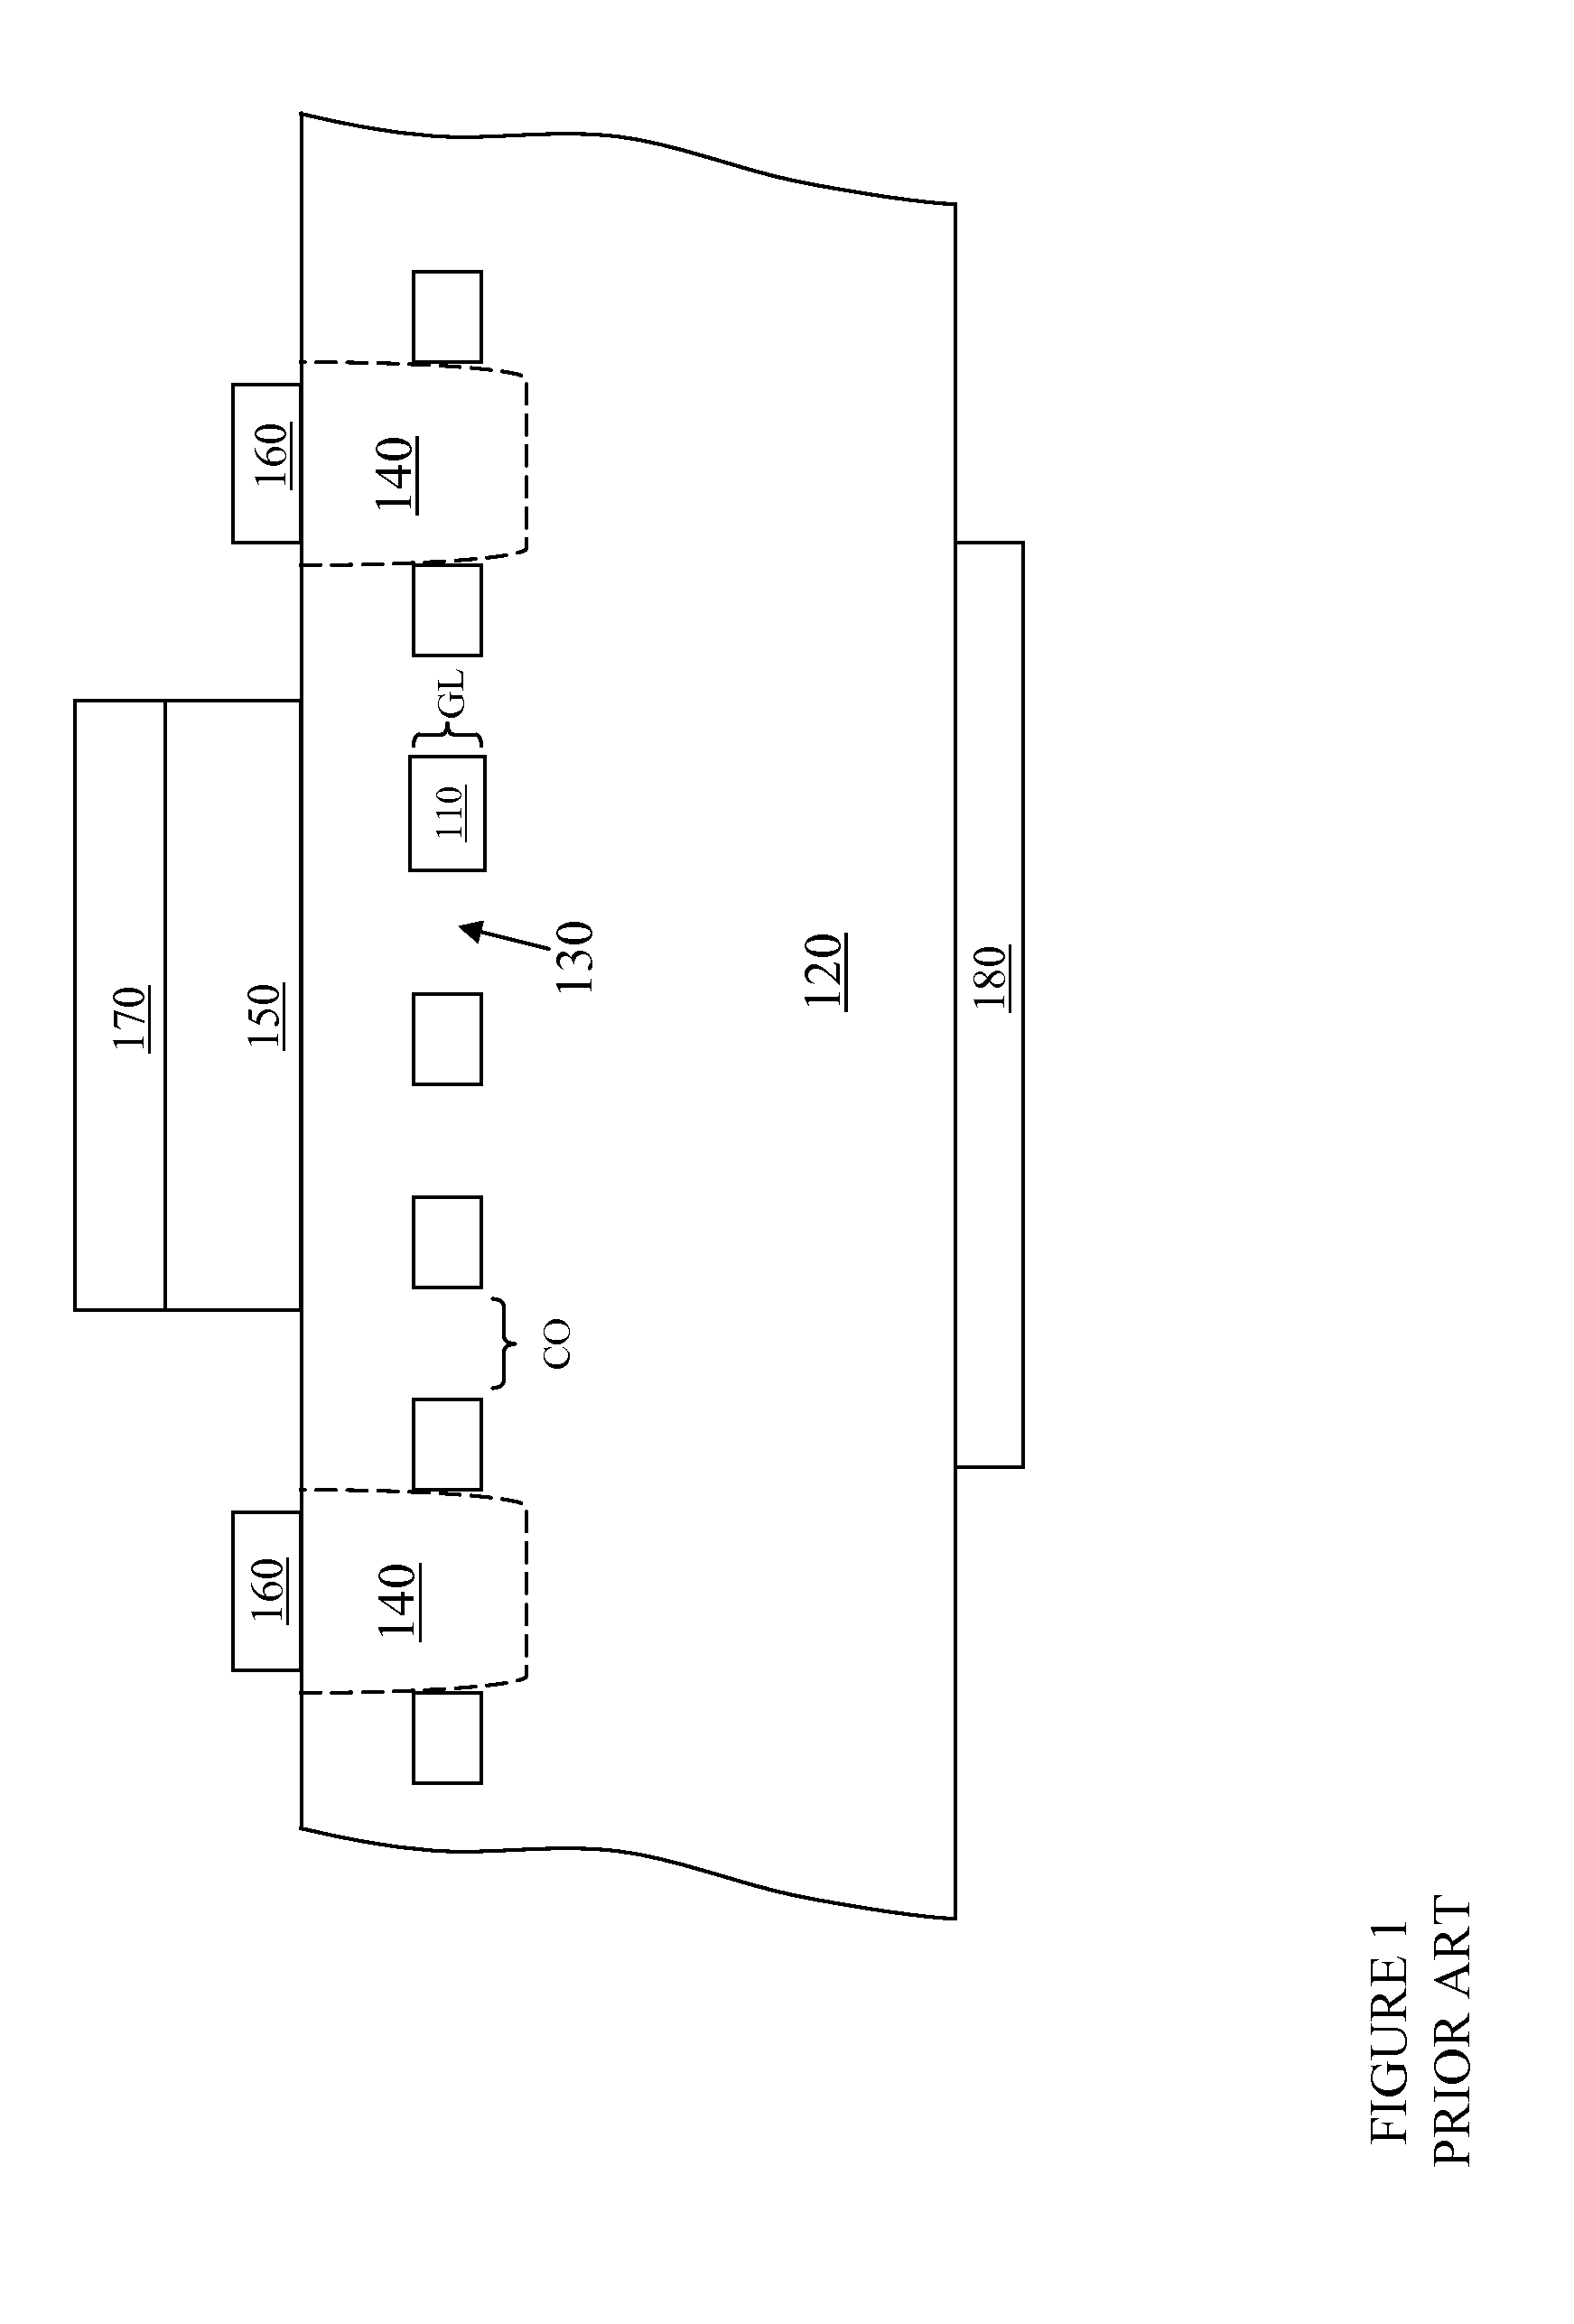 Semiconductor device including a lateral field-effect transistor and Schottky diode